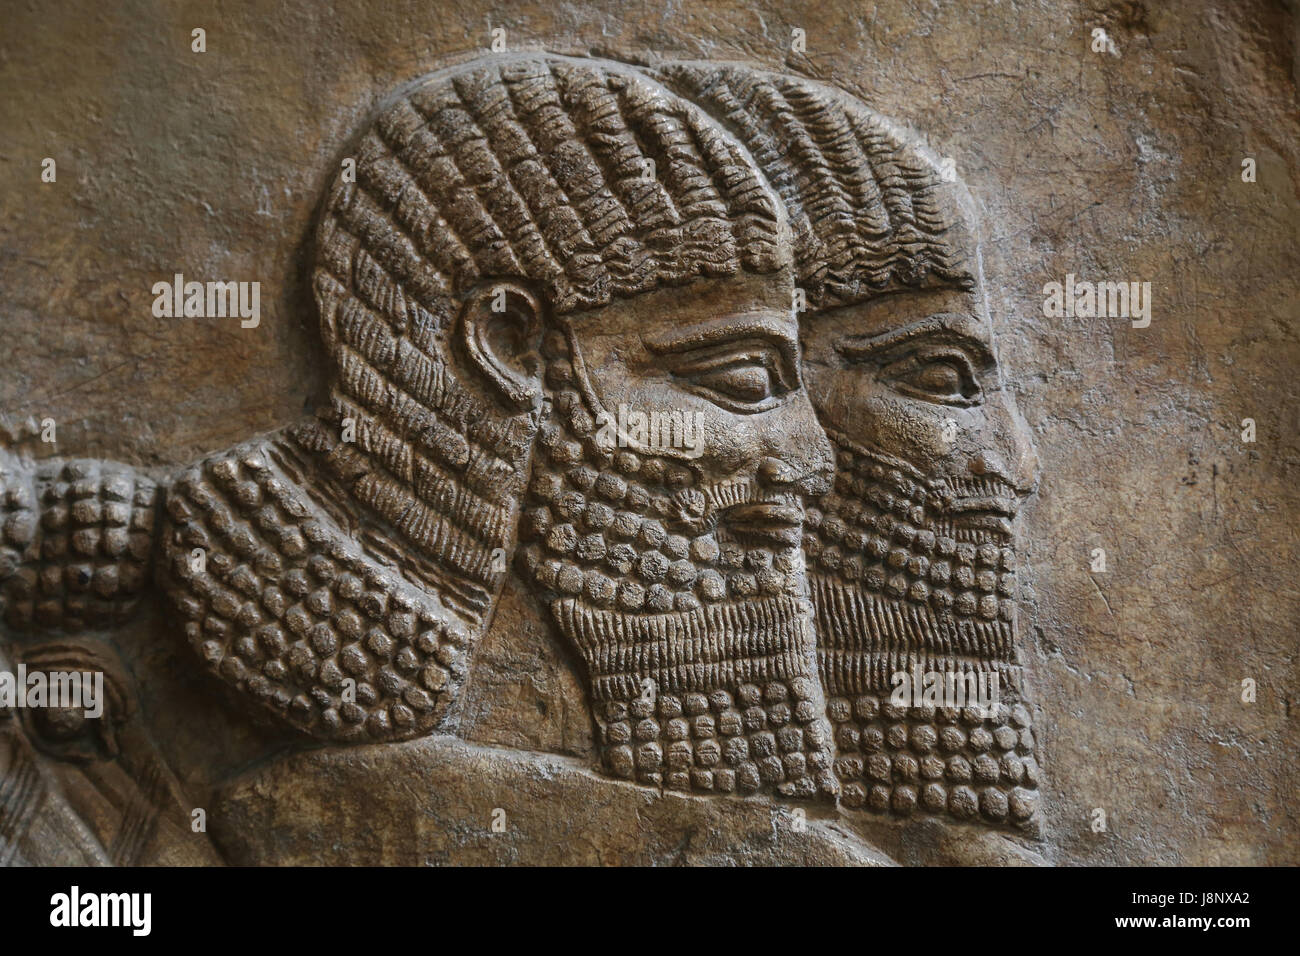 Soldier. Detail. Assyrian, 728 BC. Nimrud, Central Palace. Iraq. Campaigns in Syria and Iran in 738-7BC. British Museum. London. Stock Photo